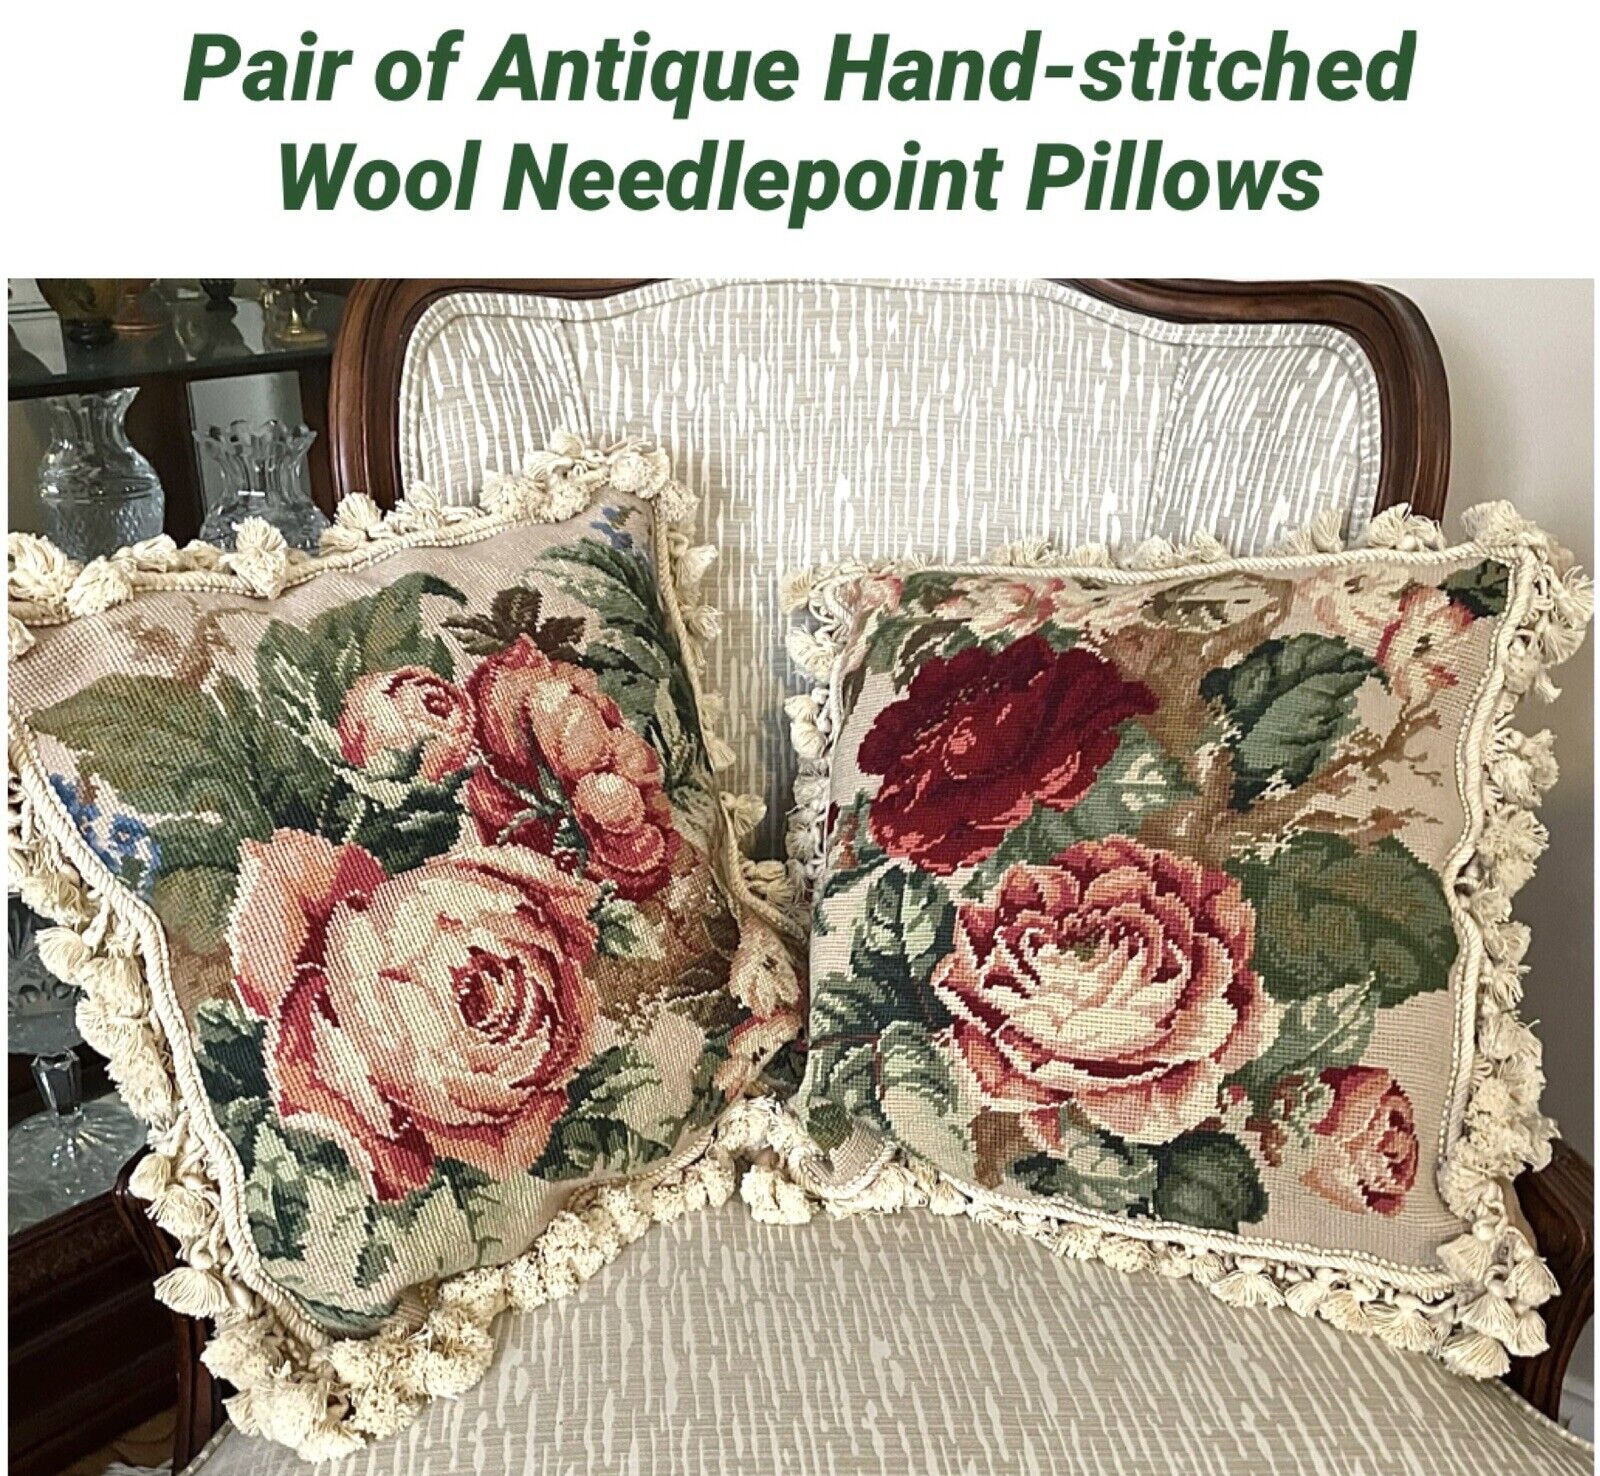 Antique Floral Wool Needlepoint  Hand stitched Pillows Pair With Down Filling